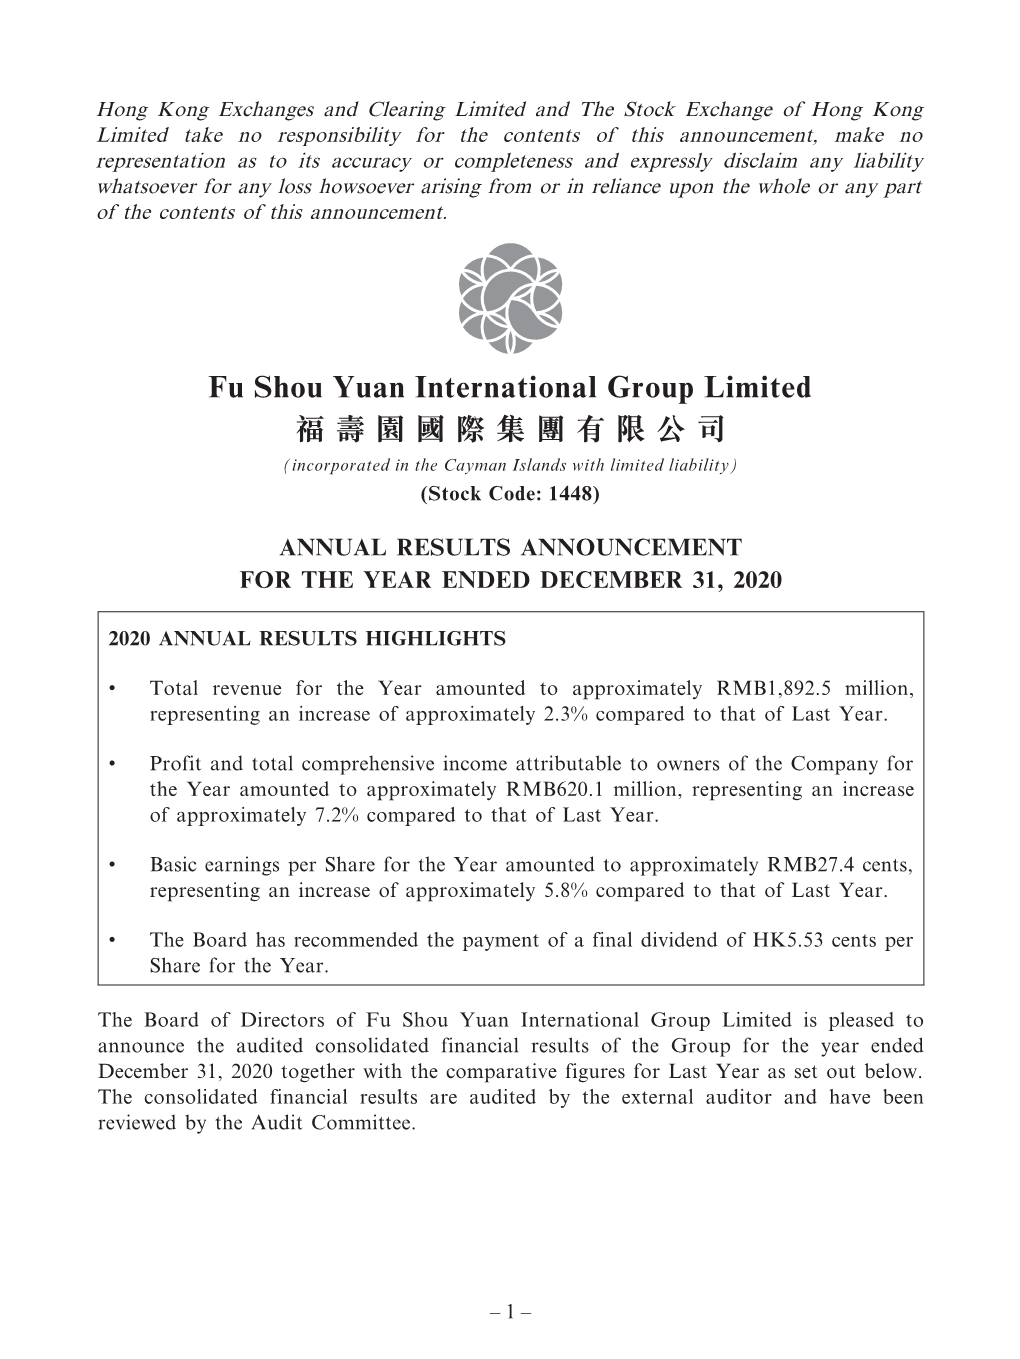 Fu Shou Yuan International Group Limited 福壽園國際集團有限公司 (Incorporated in the Cayman Islands with Limited Liability) (Stock Code: 1448)